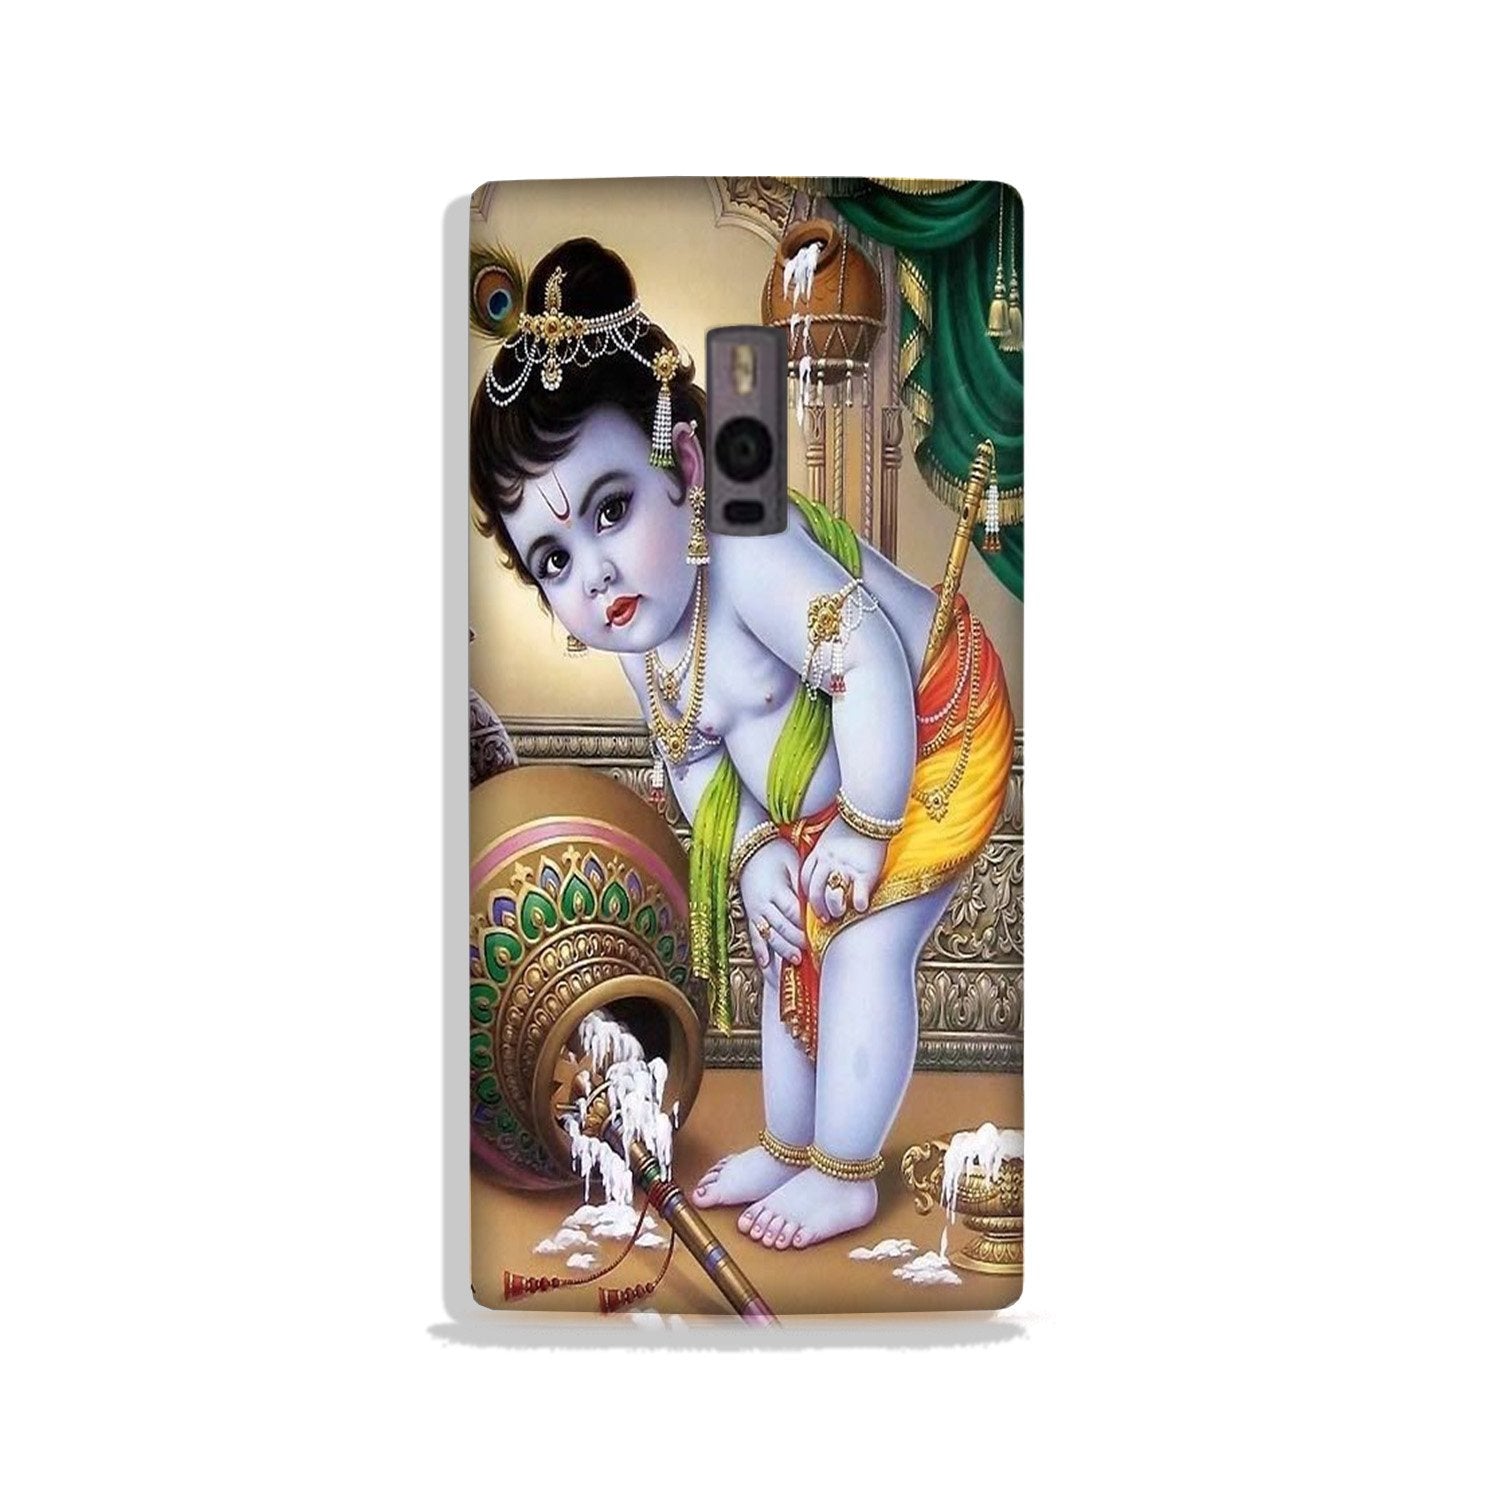 Bal Gopal2 Case for OnePlus 2